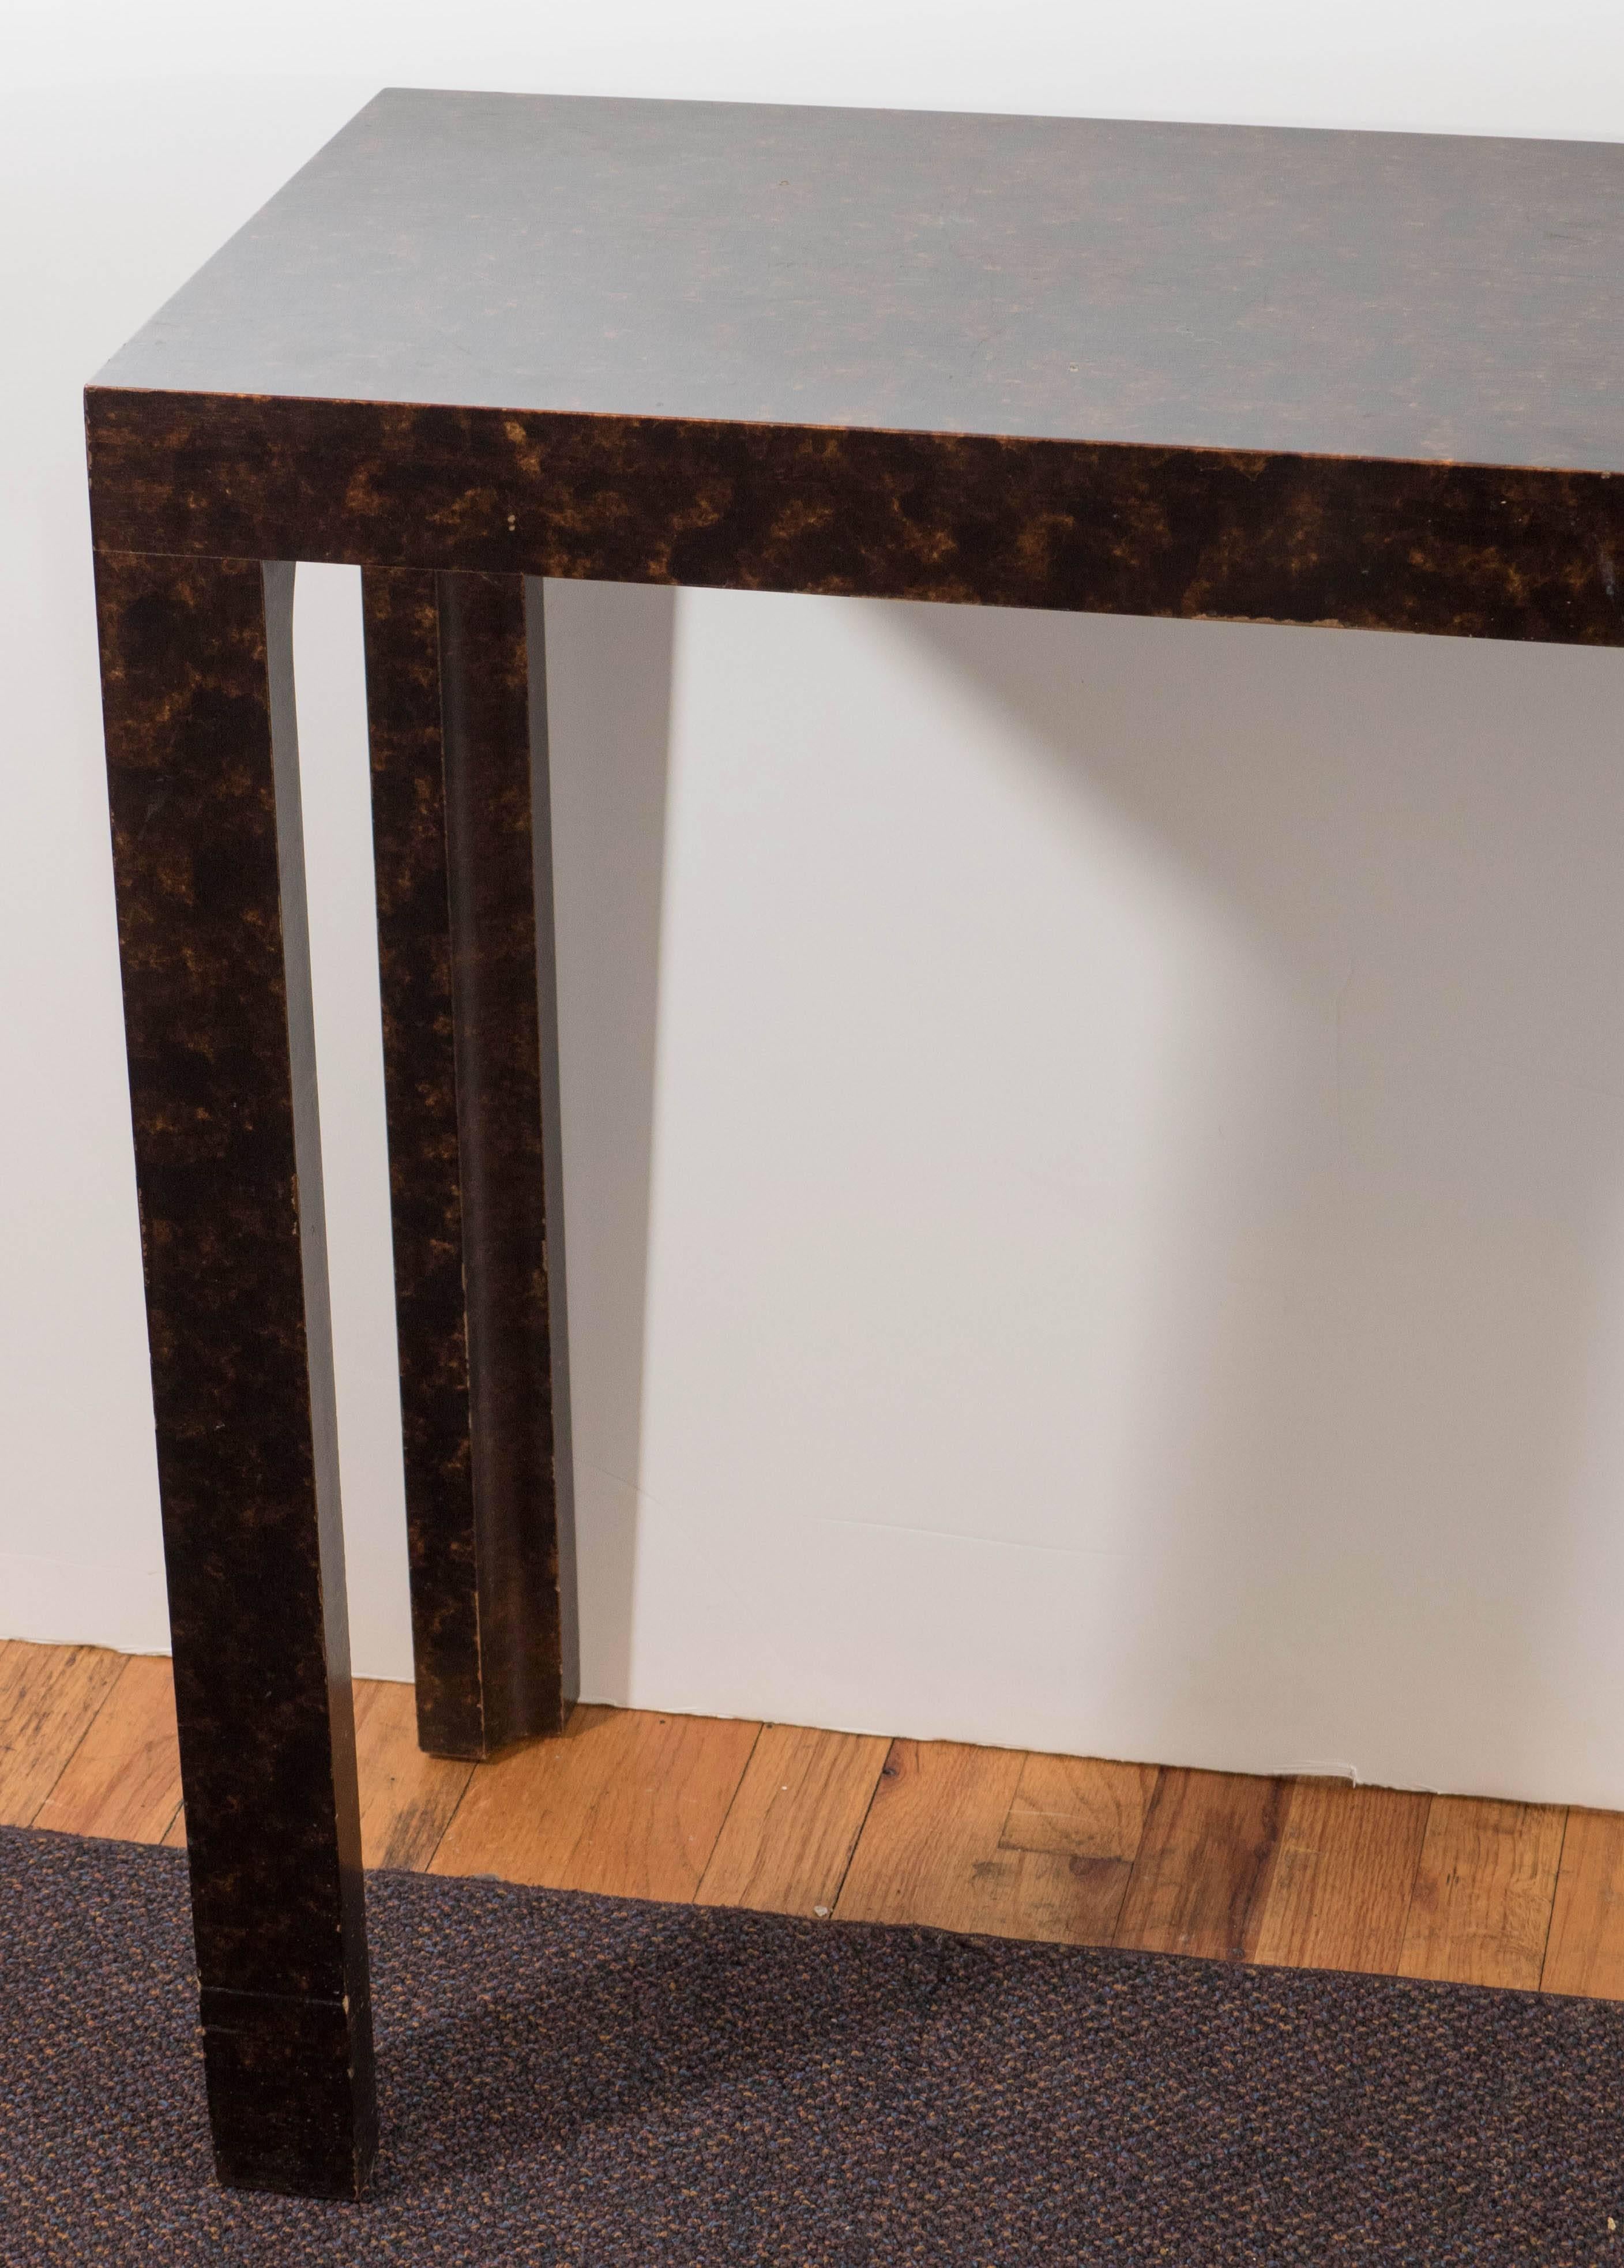 A Parsons style wooden console table by John Widdicomb, produced circa 1960s, covered in faux tortoiseshell. Markings include designer label [John Widdicomb/Makers of Fine Furniture/ Grand Rapids] to the underside of the table. This piece remains in